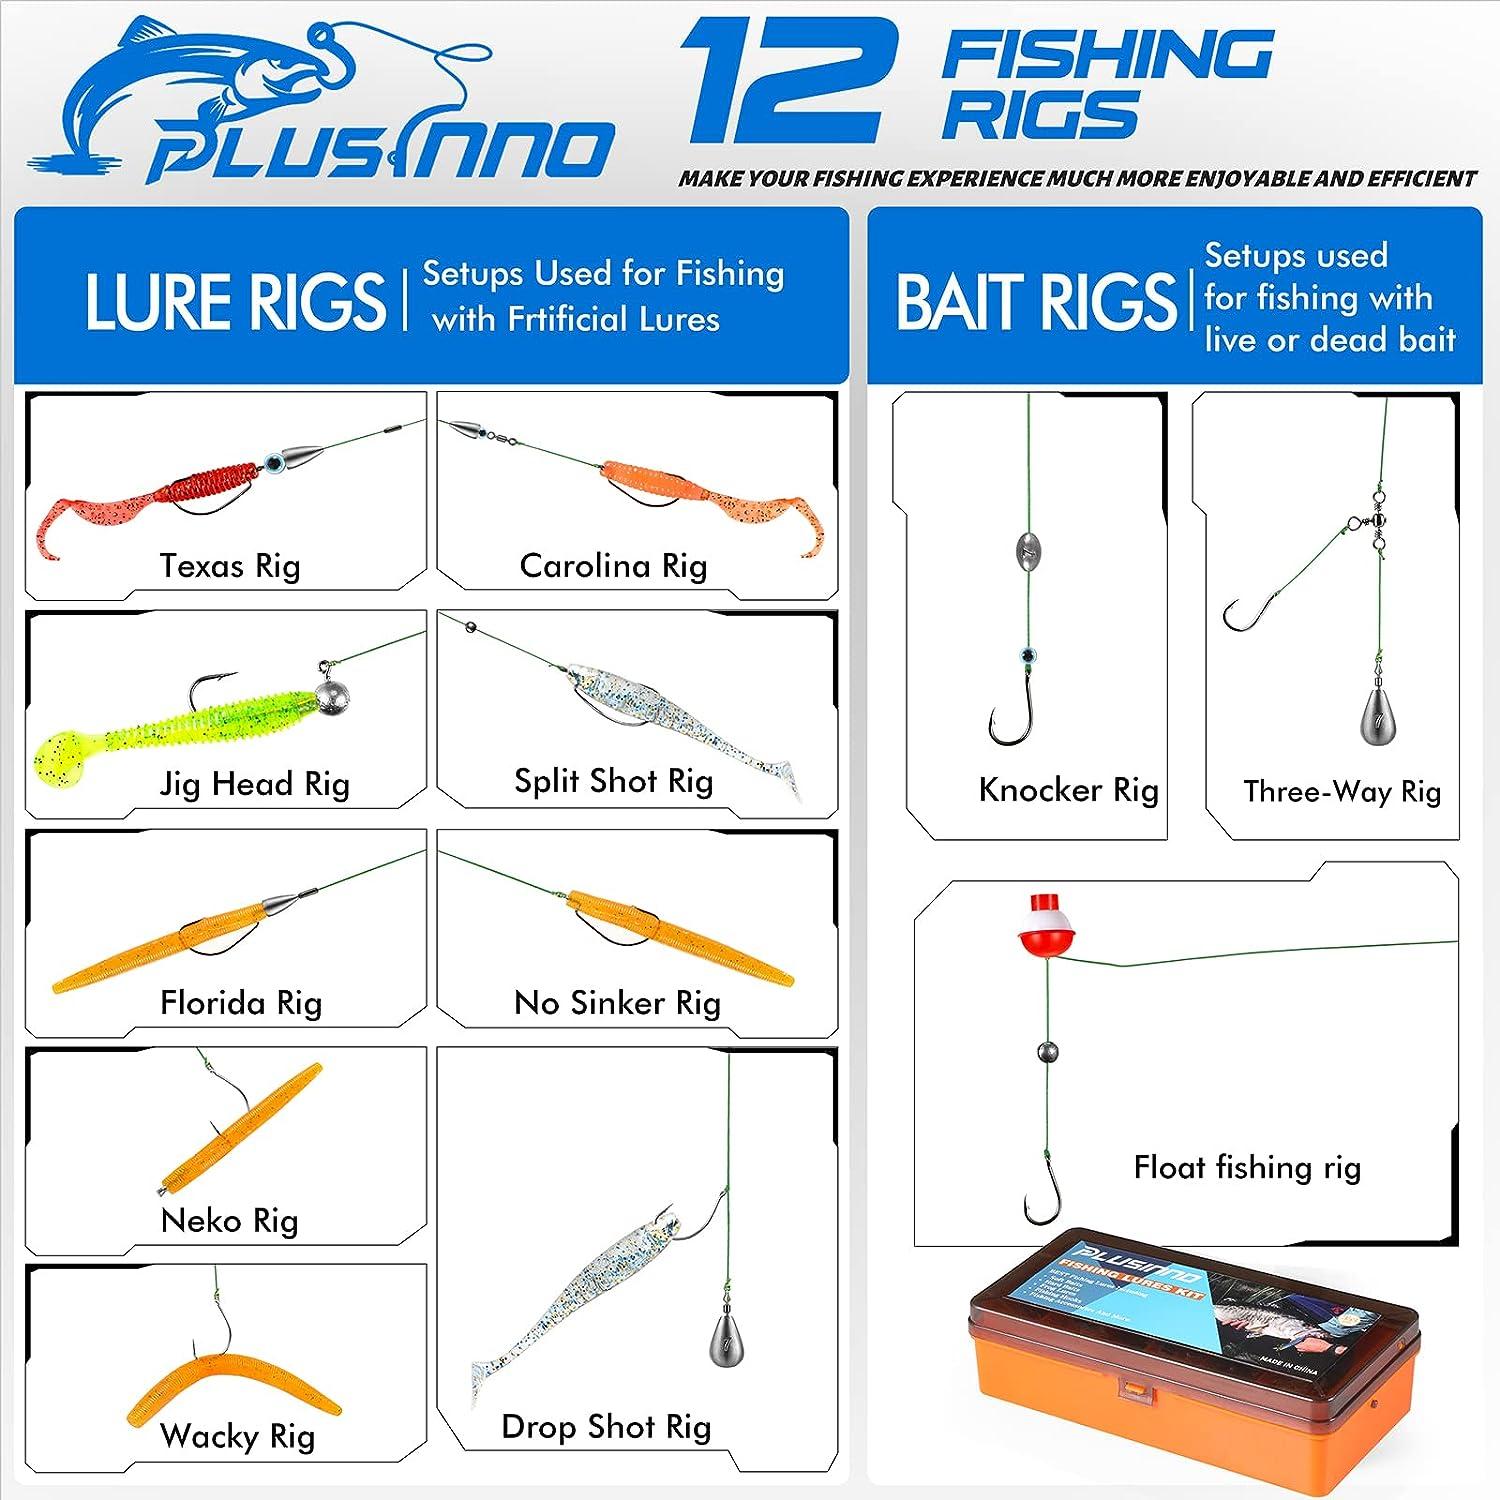 PLUSINNO Fishing Lures for 12 Rigs, Fishing Tackle Box with Tackle Included  Crankbaits, Spoon, Hooks, Weights and More Fishing Accessories, 353 Pcs  Fishing Lure Baits Gear Kit for Freshwater Bass